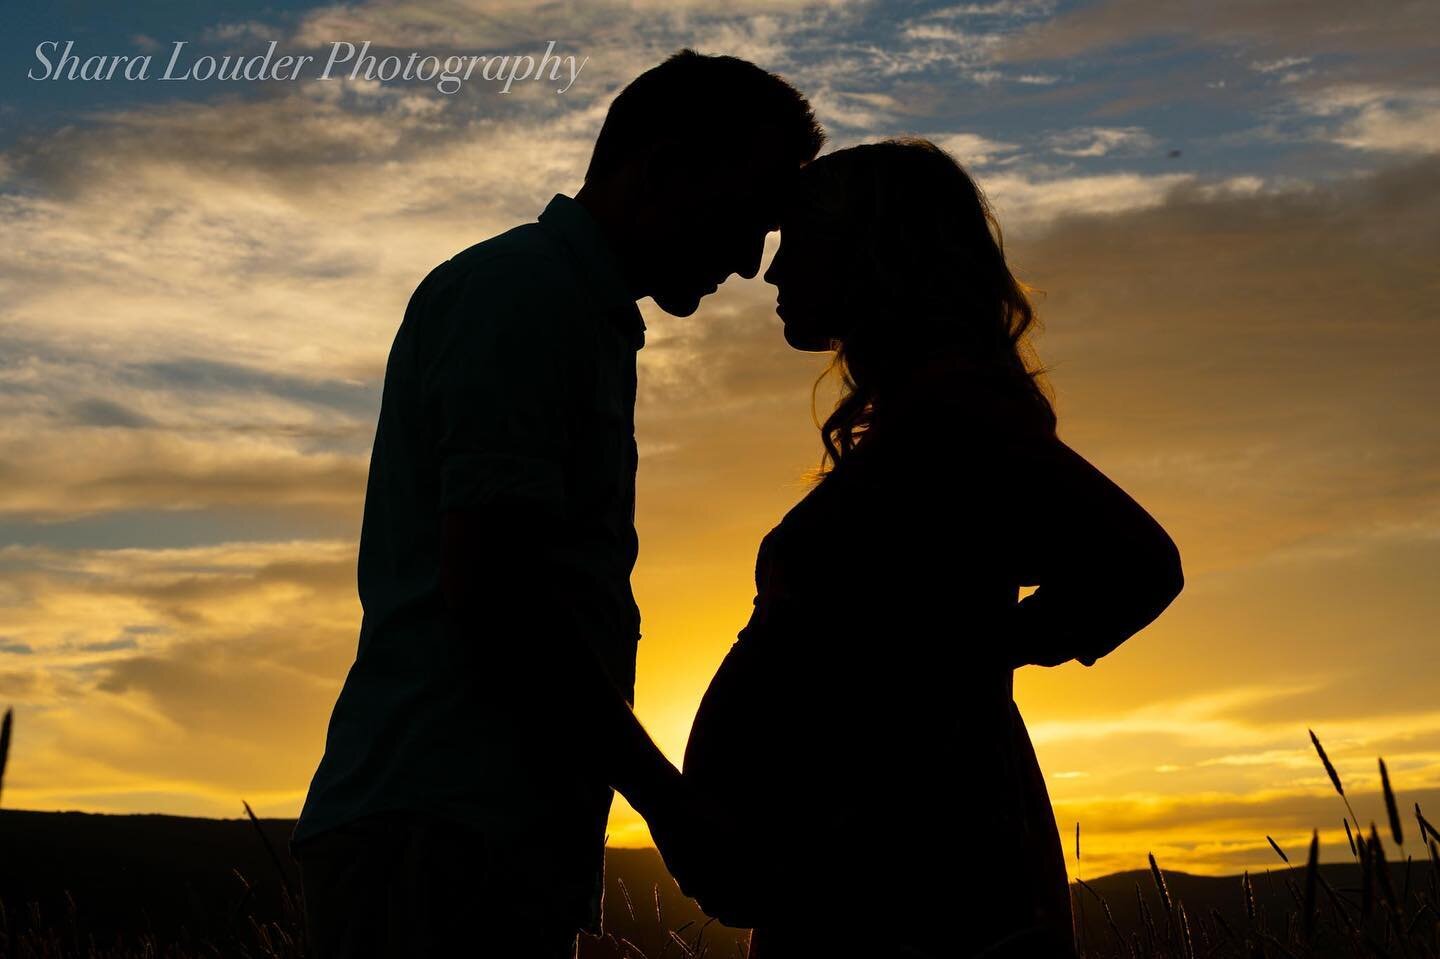 So excited for these two and their healthy and adorable baby!!! Zoey is so adorable!! Congrats Joe and Ivy! #sharalouderphotography #firstbaby #maternityphotography #summitcountyphotographer #kamasutahphotographer #lifeisbeautiful #straightfromheaven